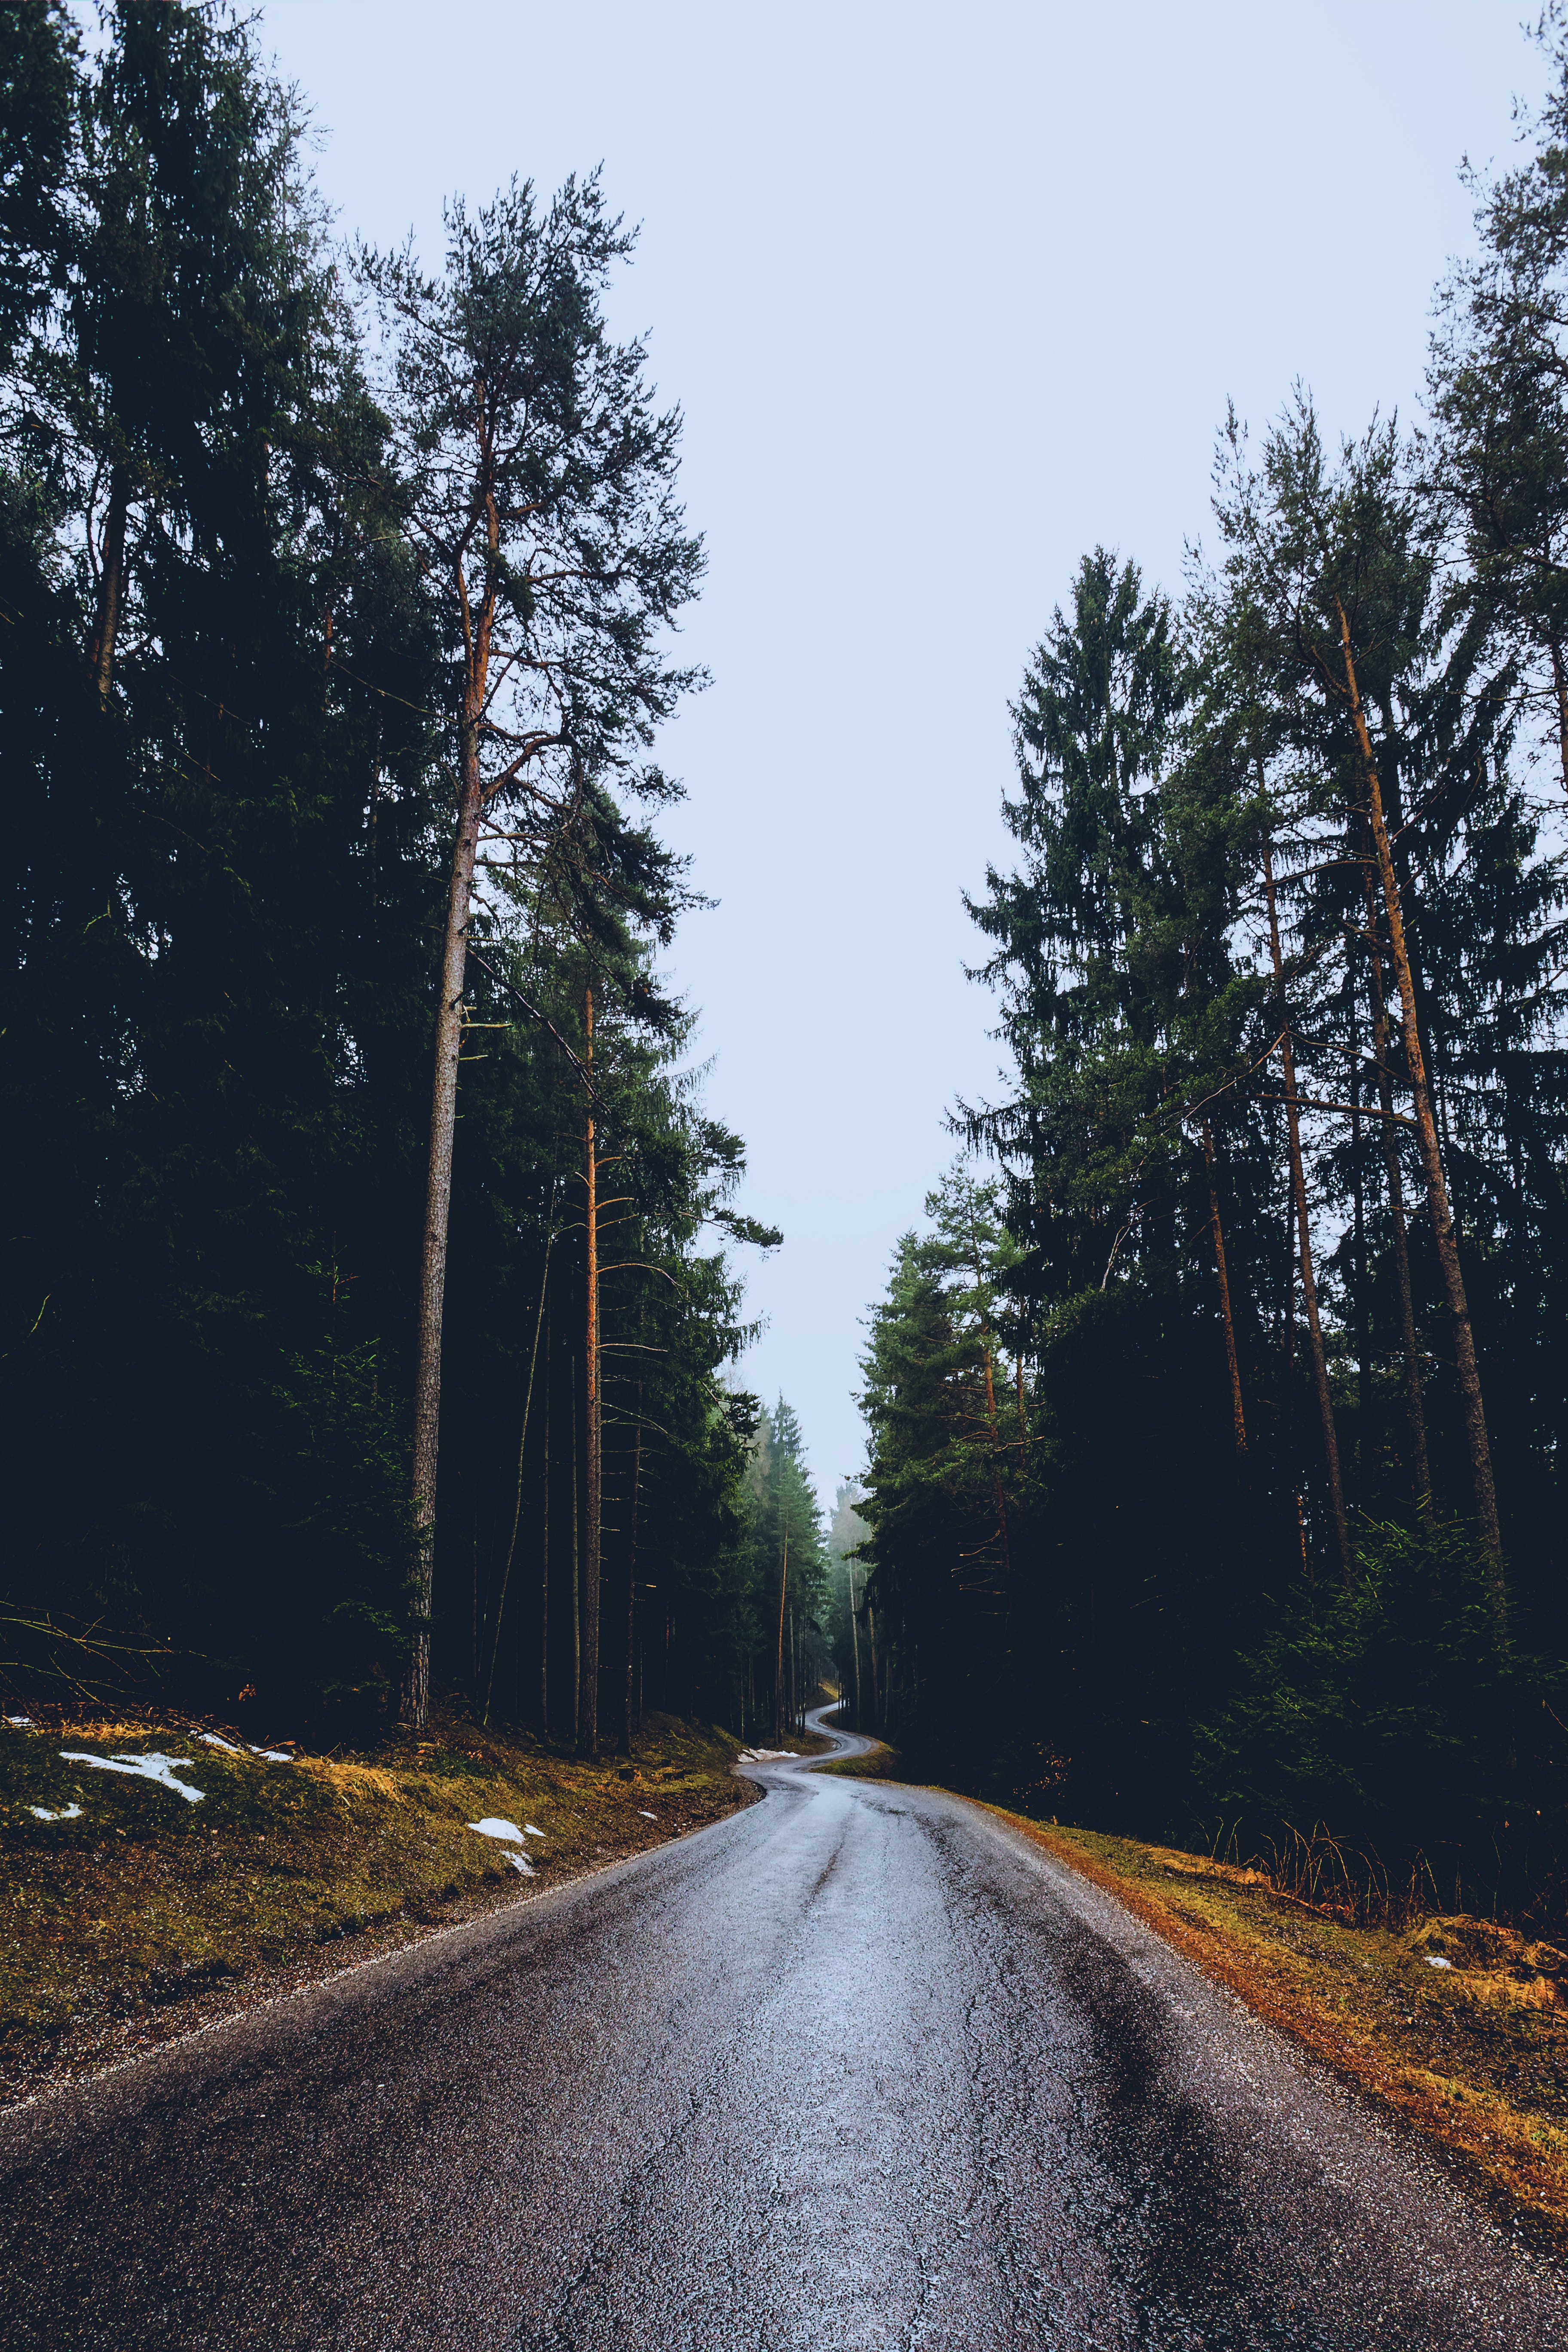 nature, trees, road, wet, asphalt, spring, winding, sinuous, humid